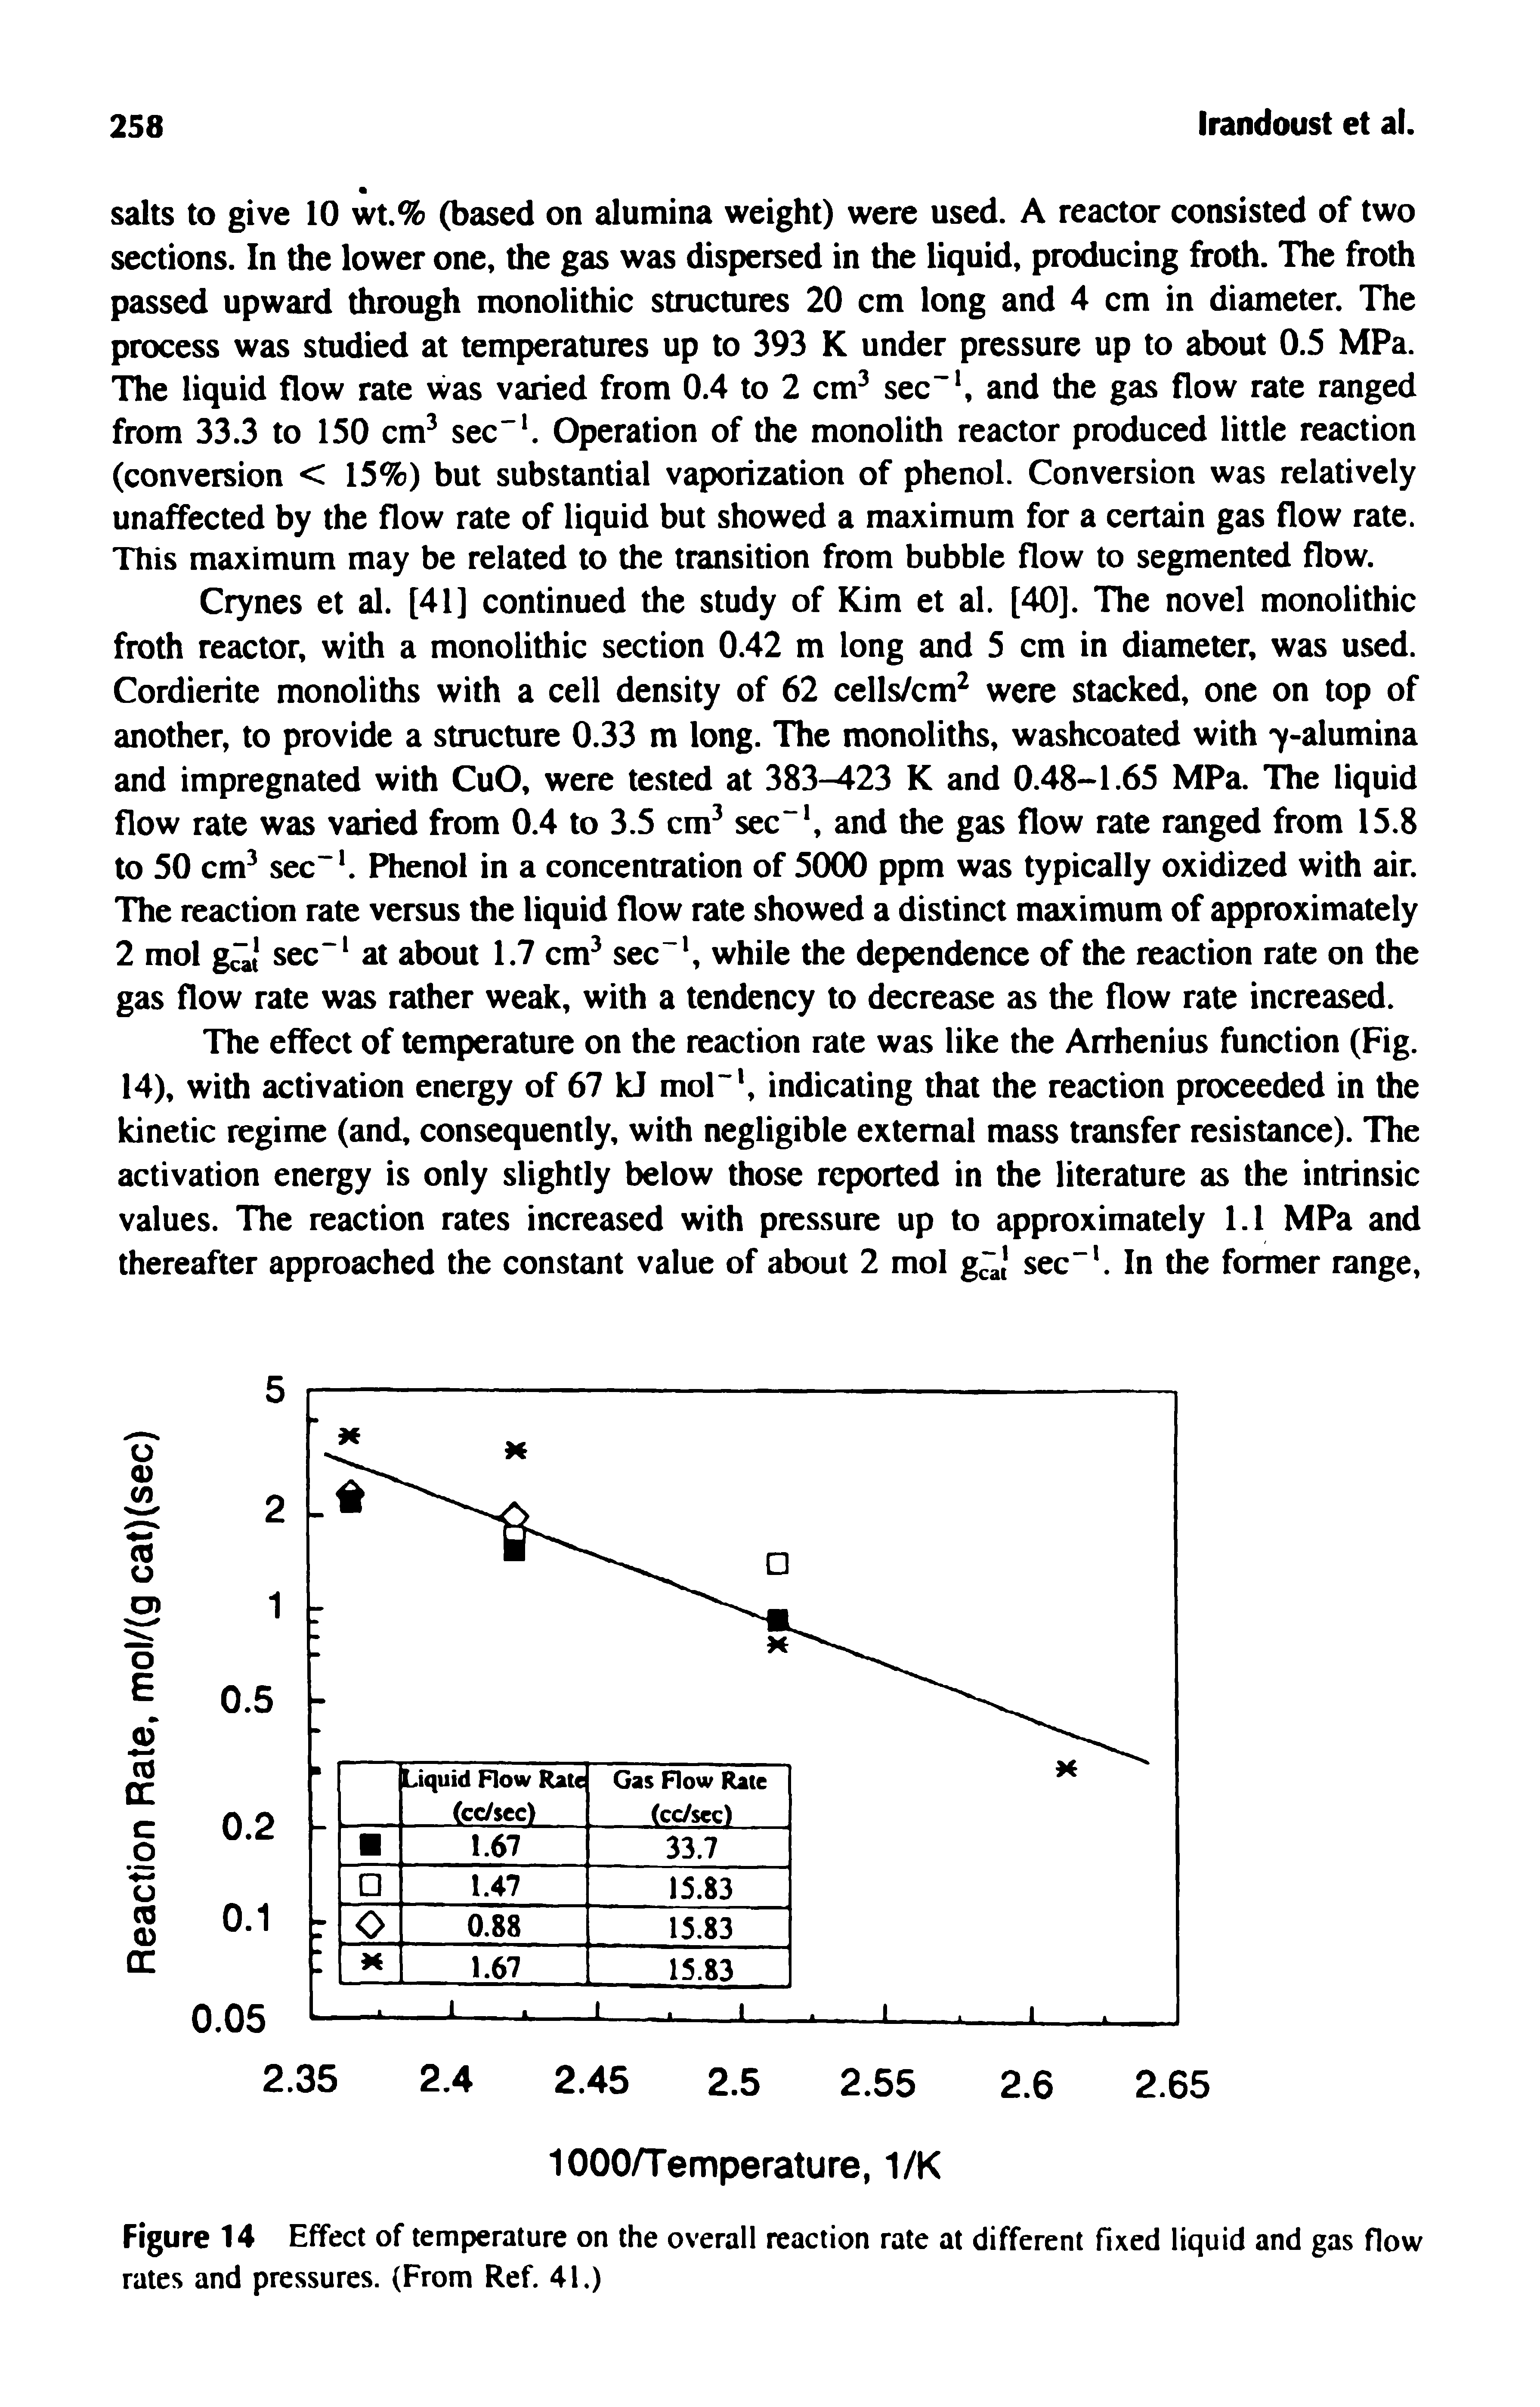 Figure 14 Effect of temperature on the overall reaction rate at different fixed liquid and gas flow rates and pressures. (From Ref. 41.)...